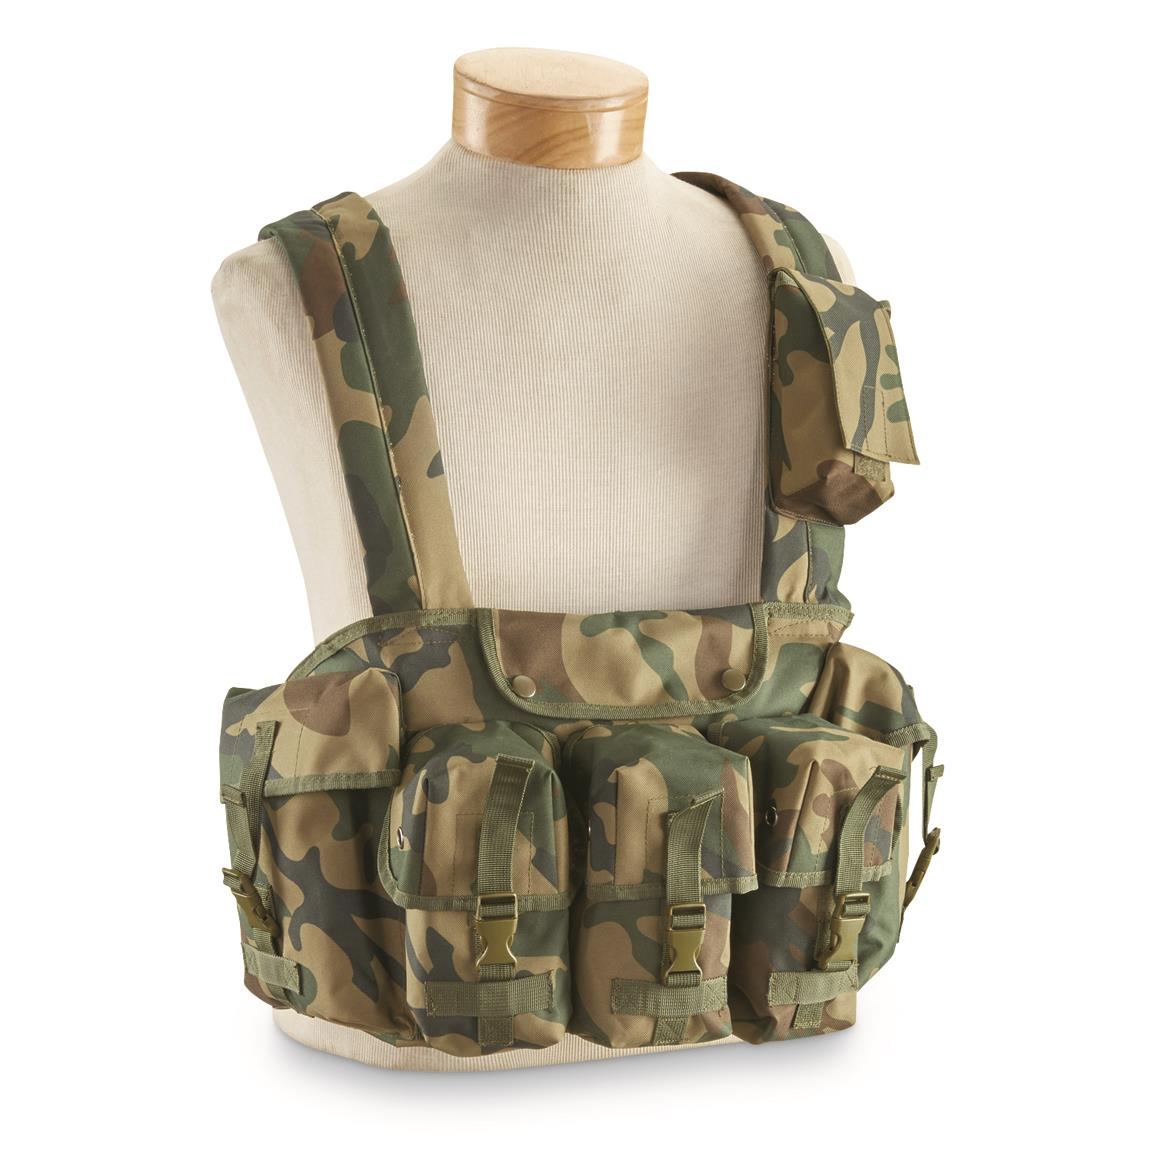 Mil-Tec Military-style Woodland Camo Chest Rig - 702752, Military ...